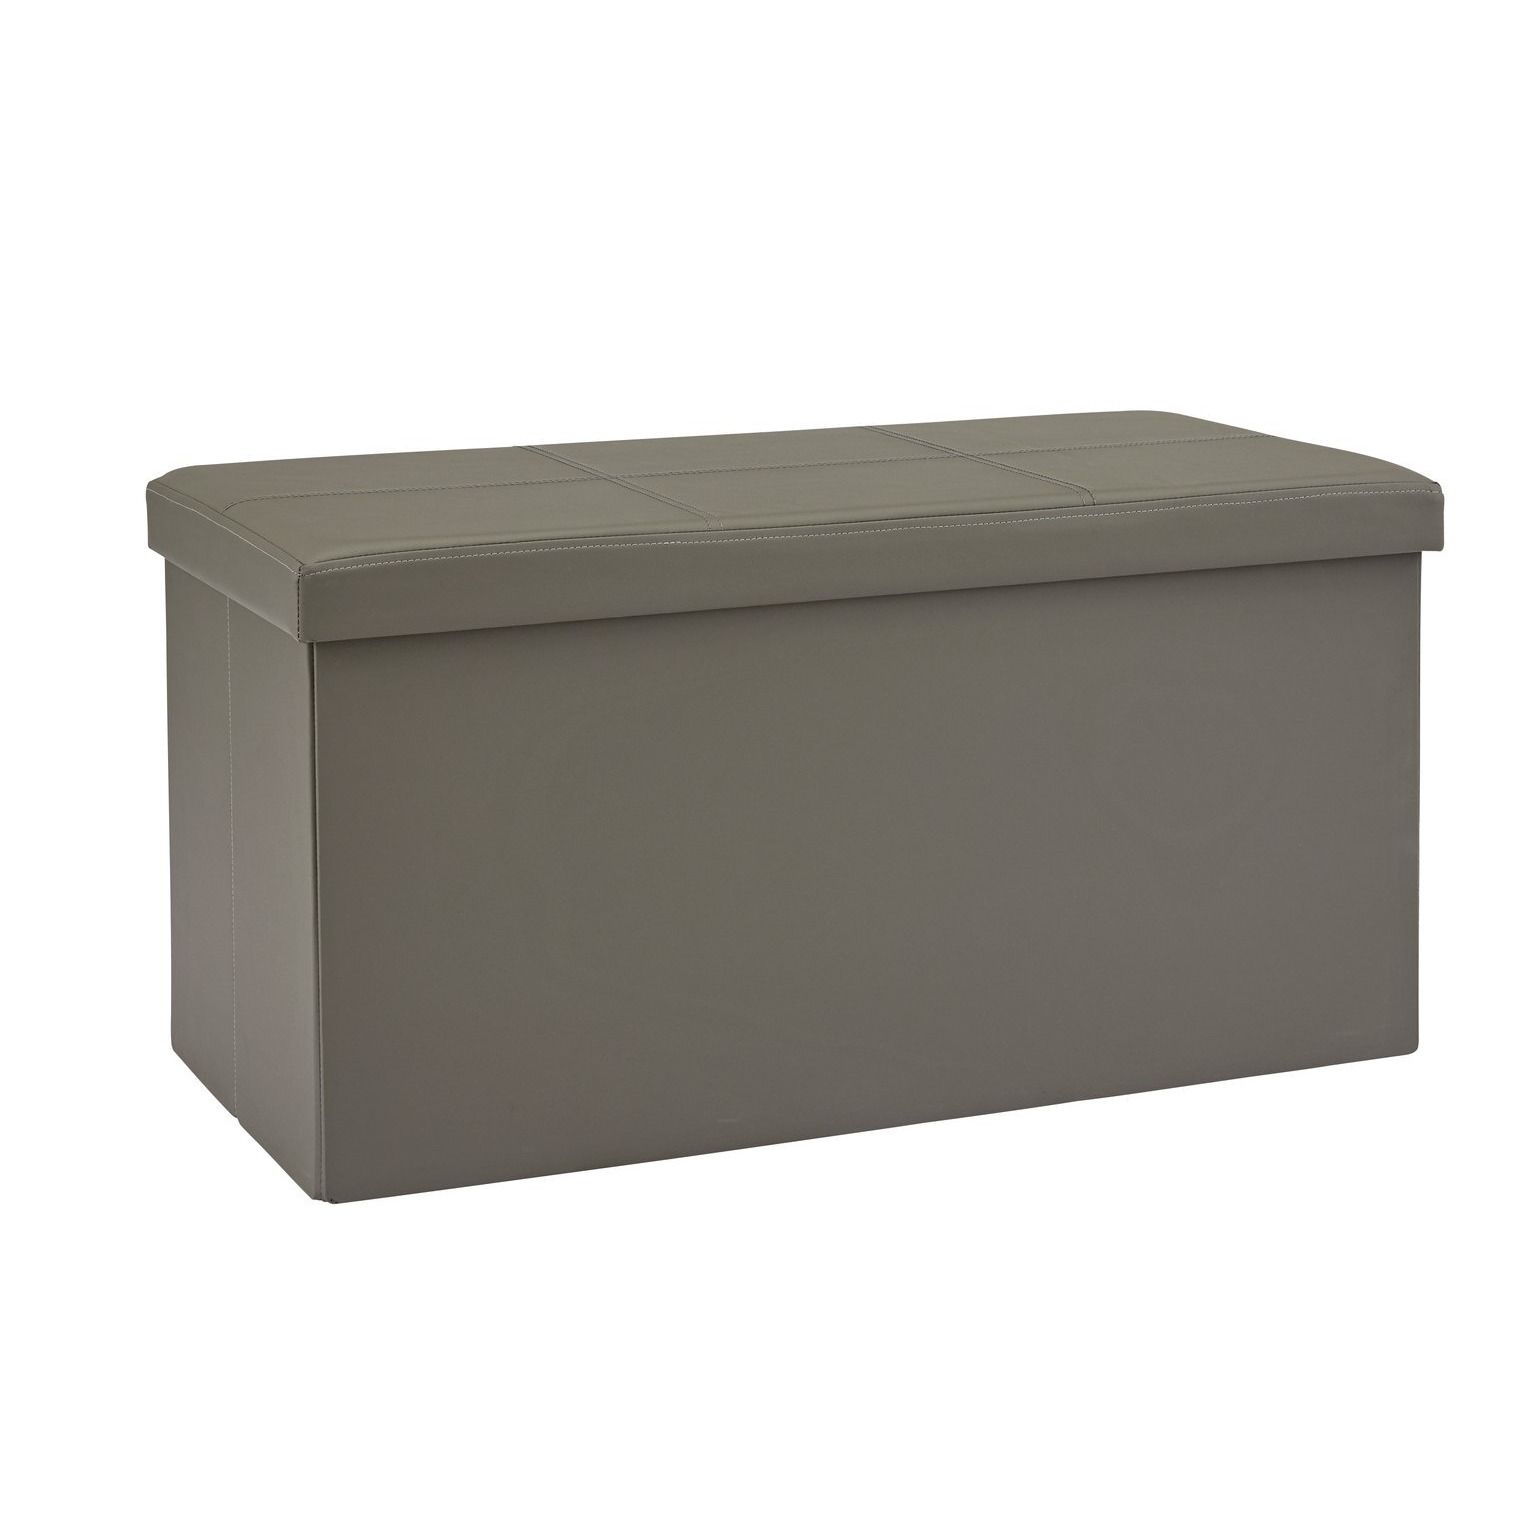 Argos Home Large Faux Leather Ottoman - Grey - image 1